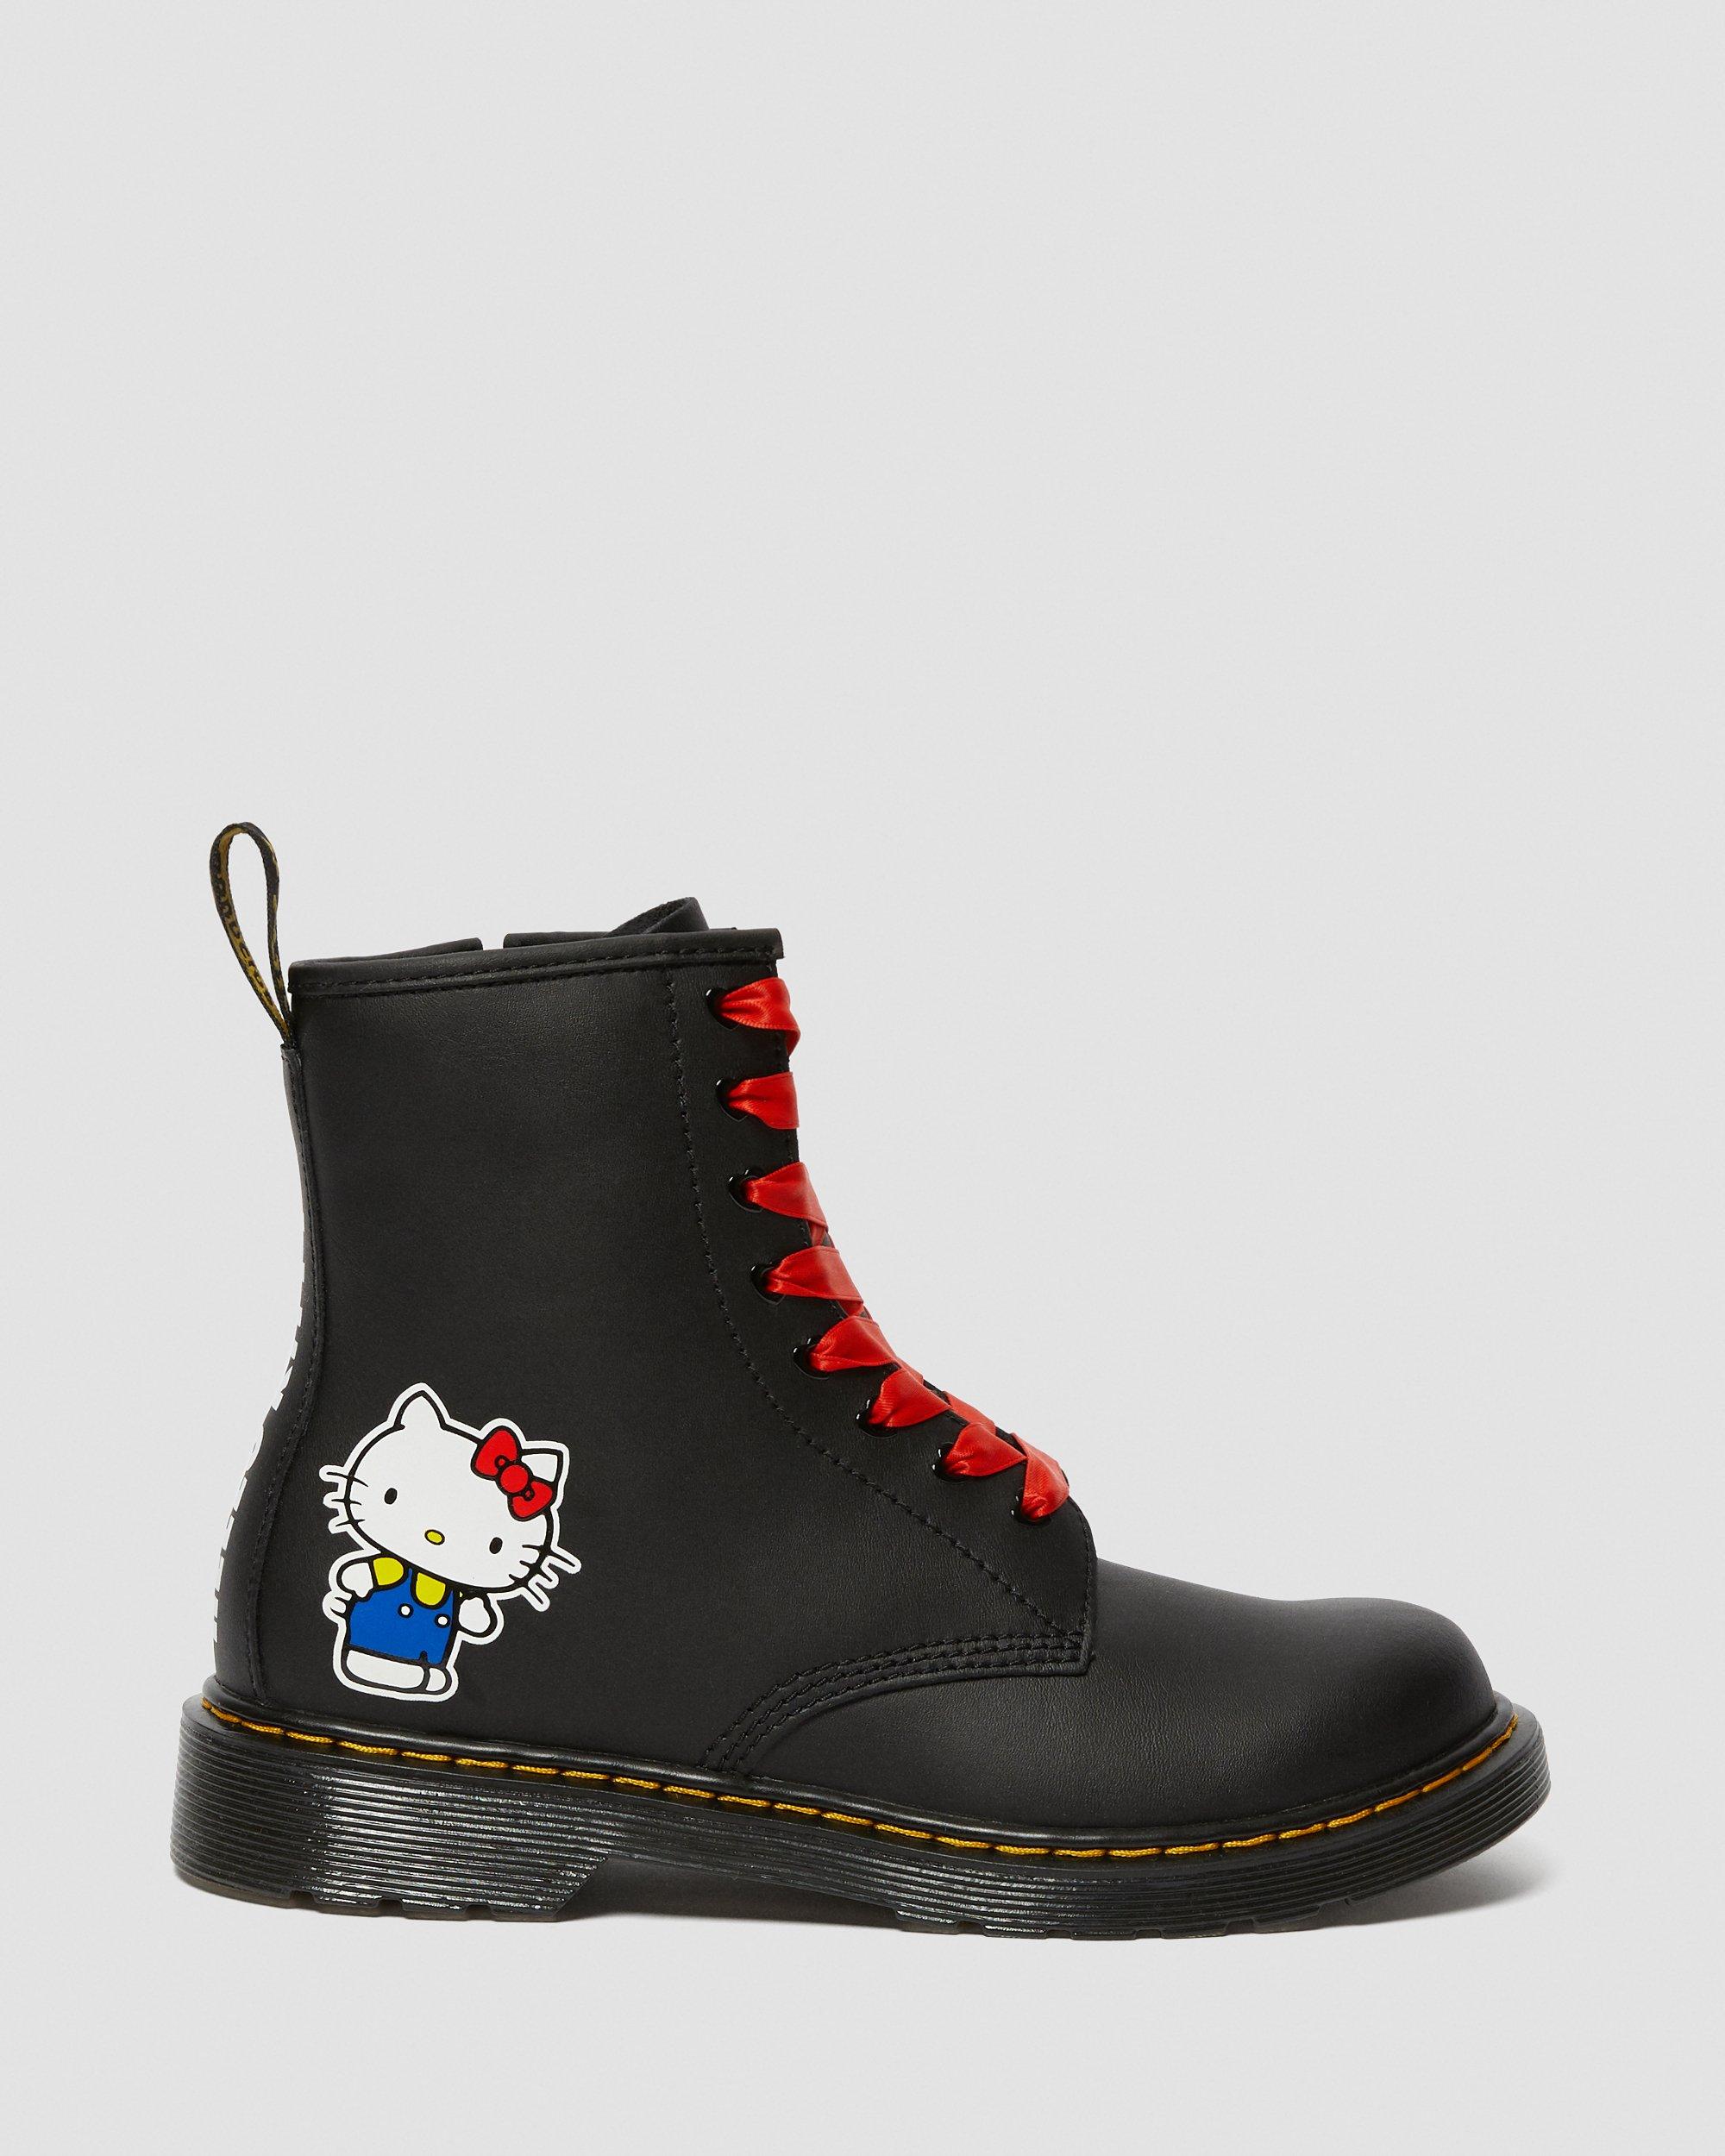 Picasso Zenuw lucht Youth 1460 Hello Kitty Leather Boots | Dr. Martens